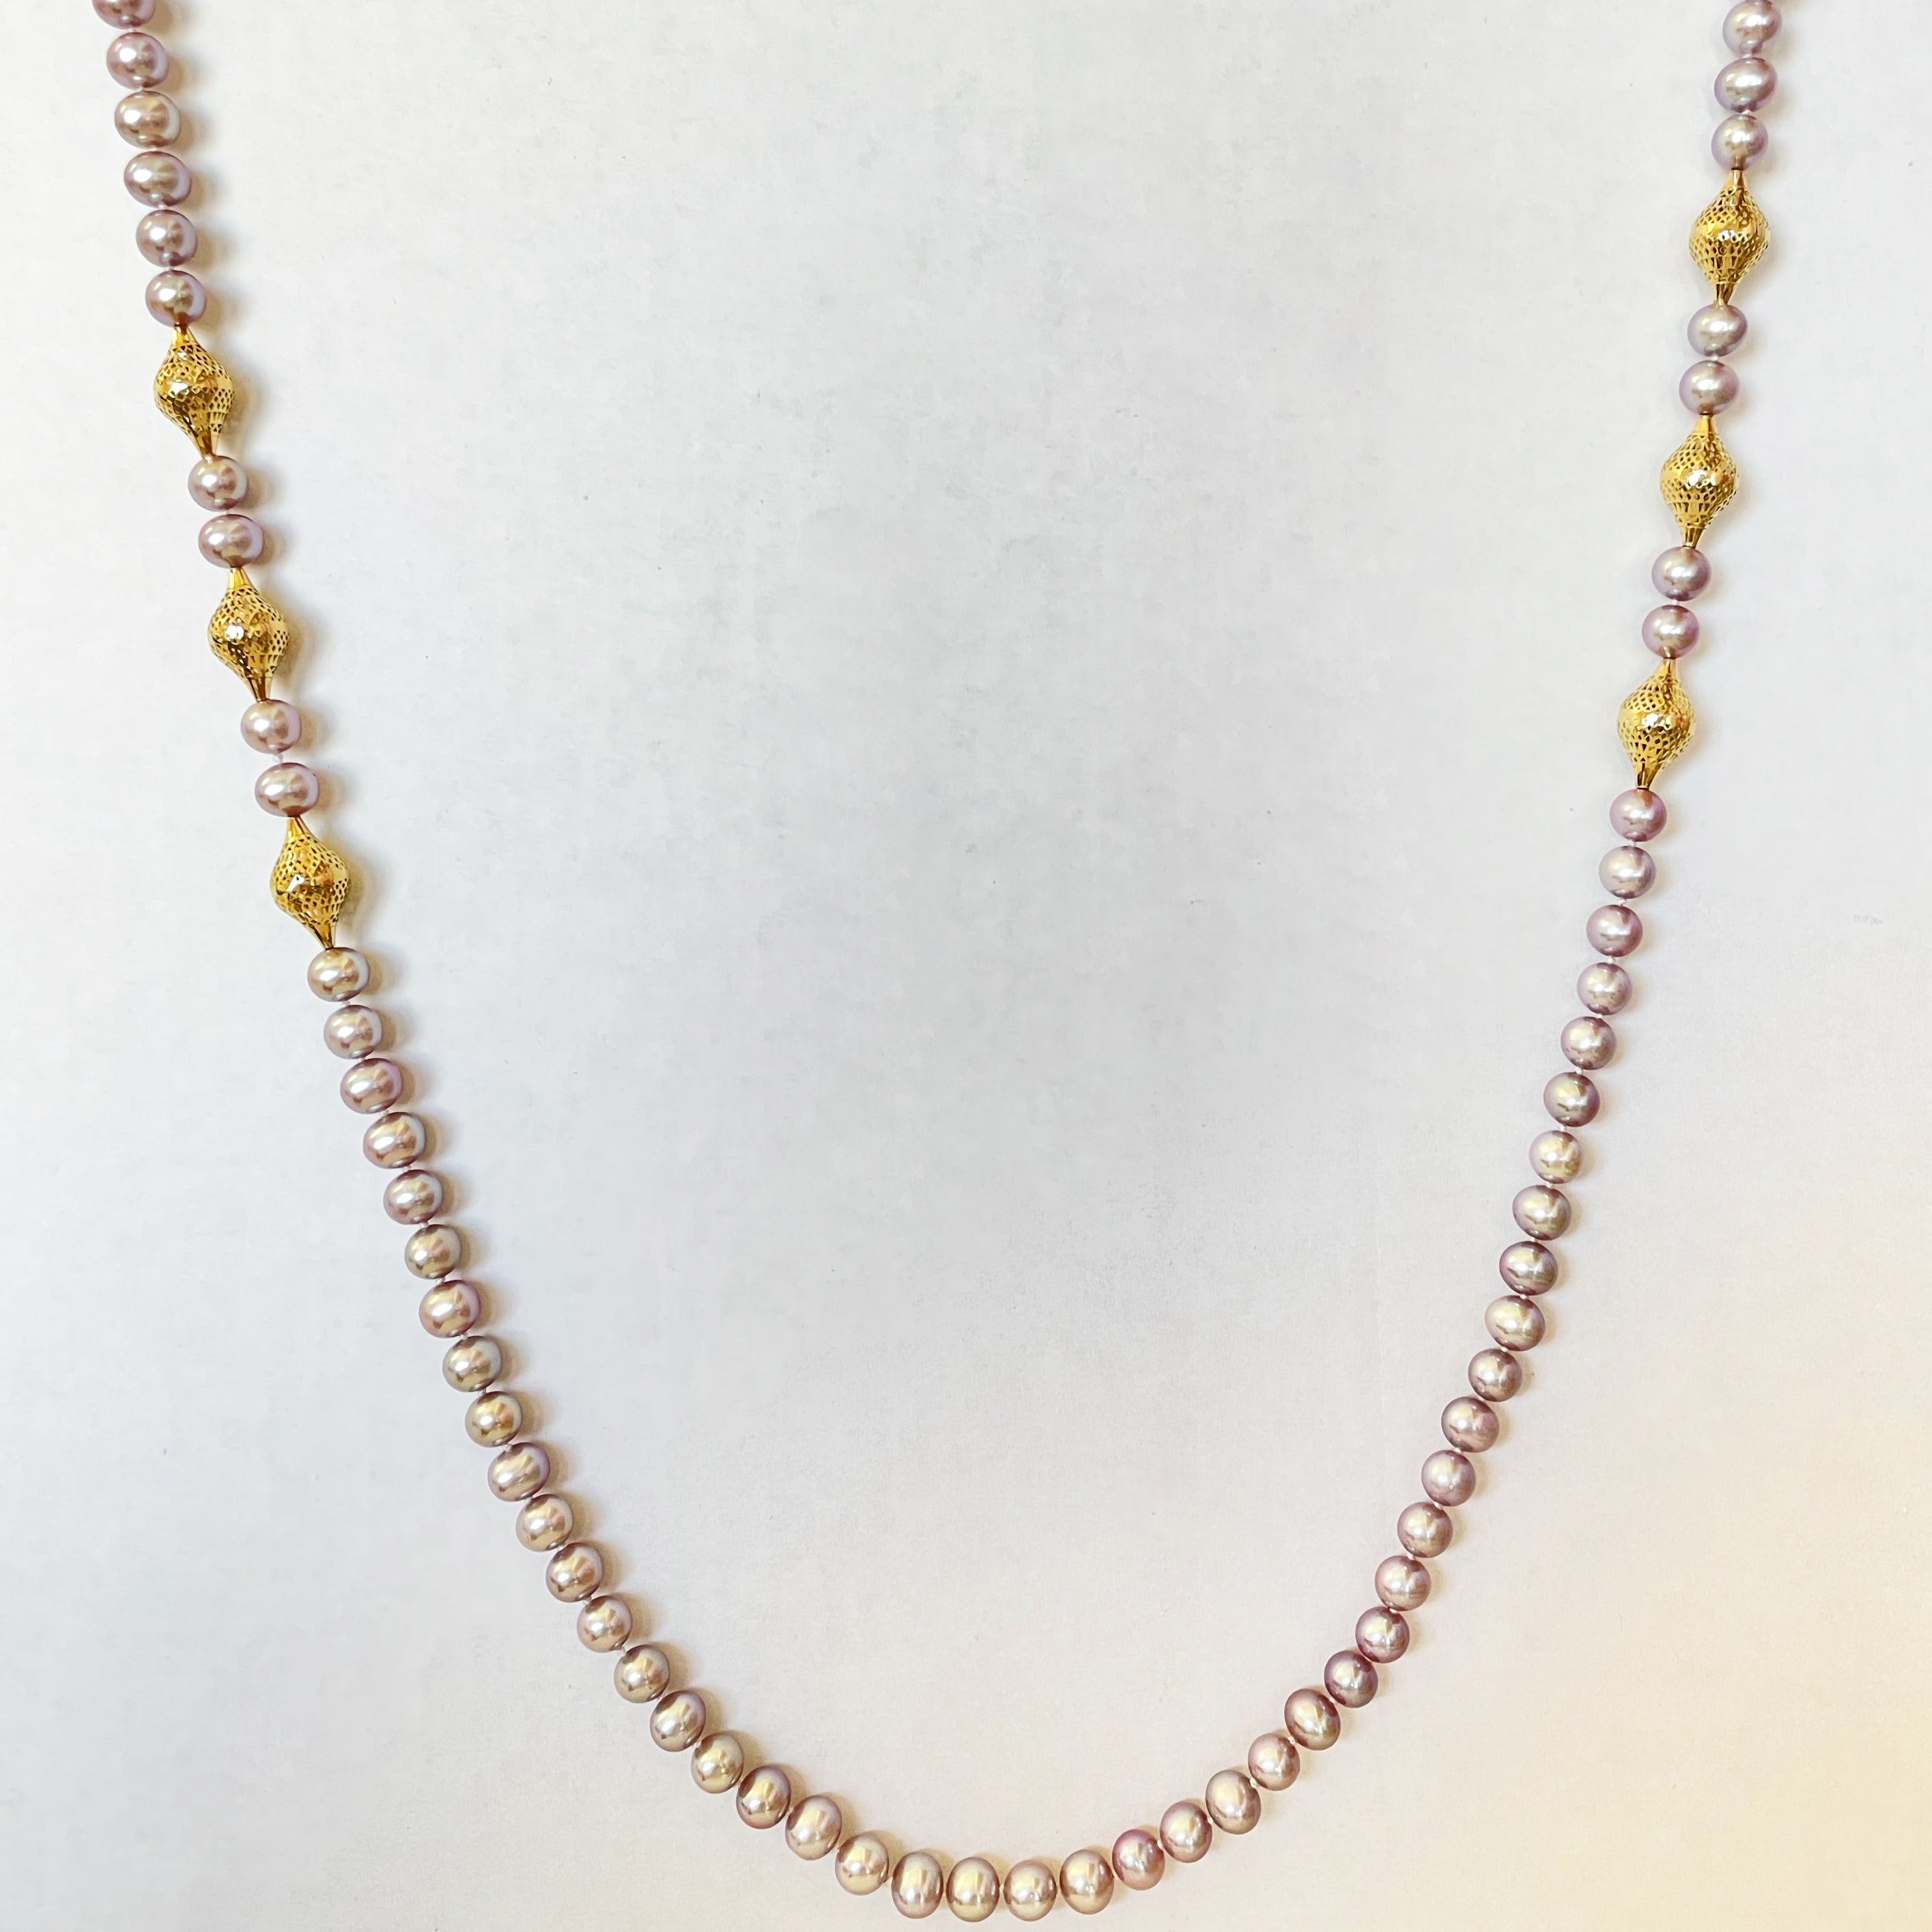 Pale Pink Pearl Wrap Necklace